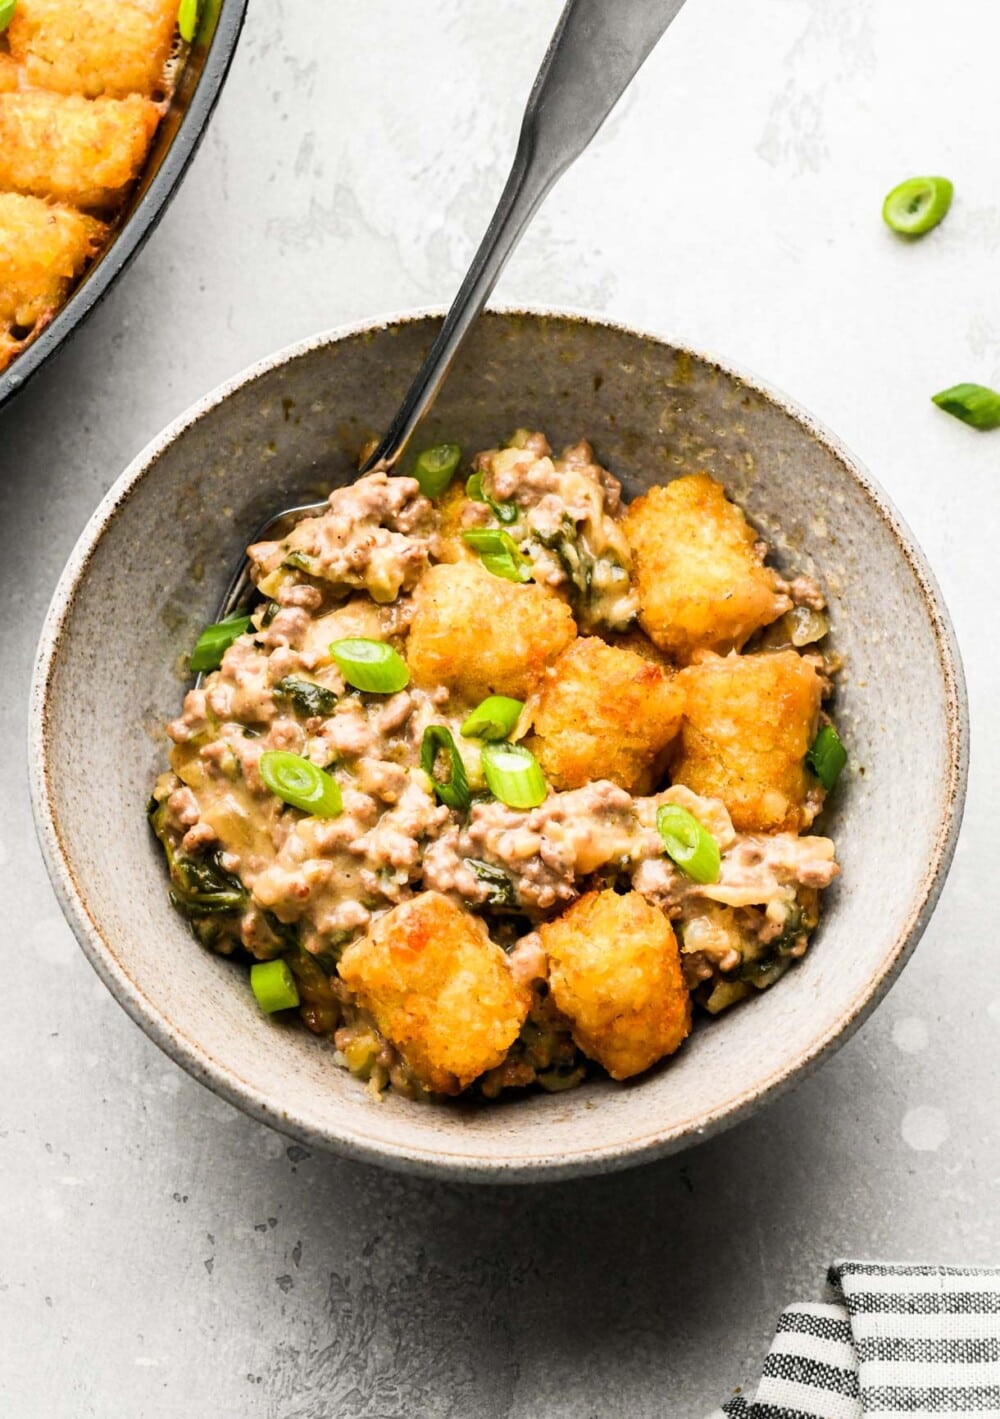 tater tot hotdish in a grey bowl with spoon.